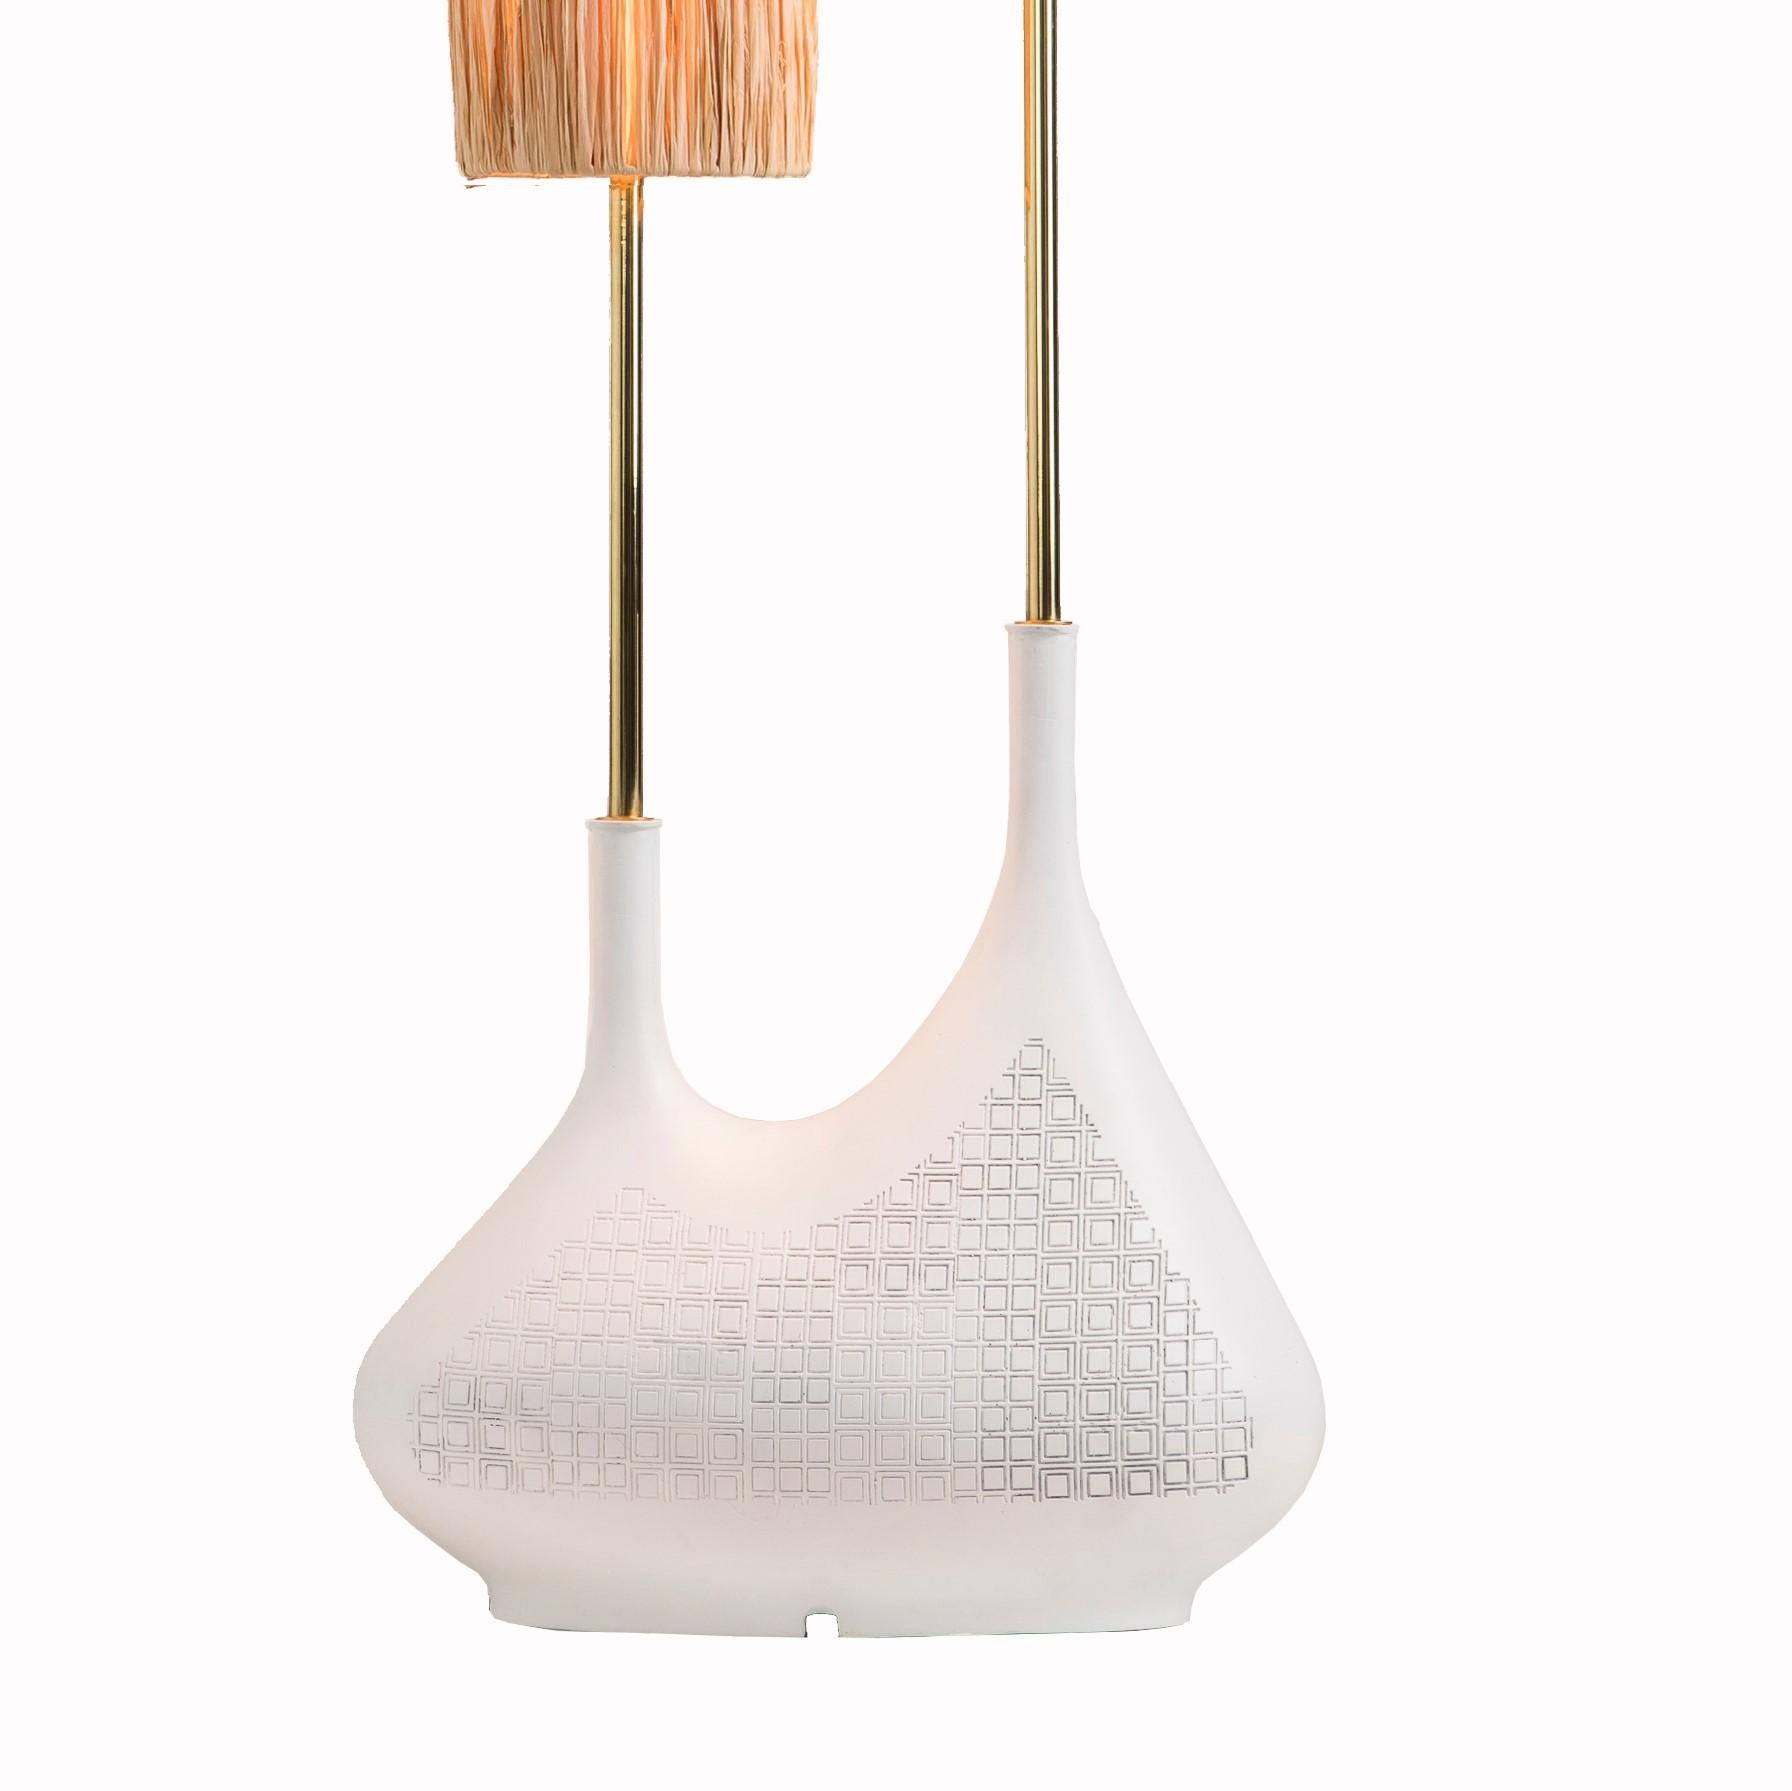 Pod double table lamp by Egg Designs
Dimensions: 45 L x 45 D x 68 H cm
Materials: Composite casting, brass, raffia

Founded by South Africans and life partners, Greg and Roche Dry - Egg is a unique perspective in contemporary furniture inspired